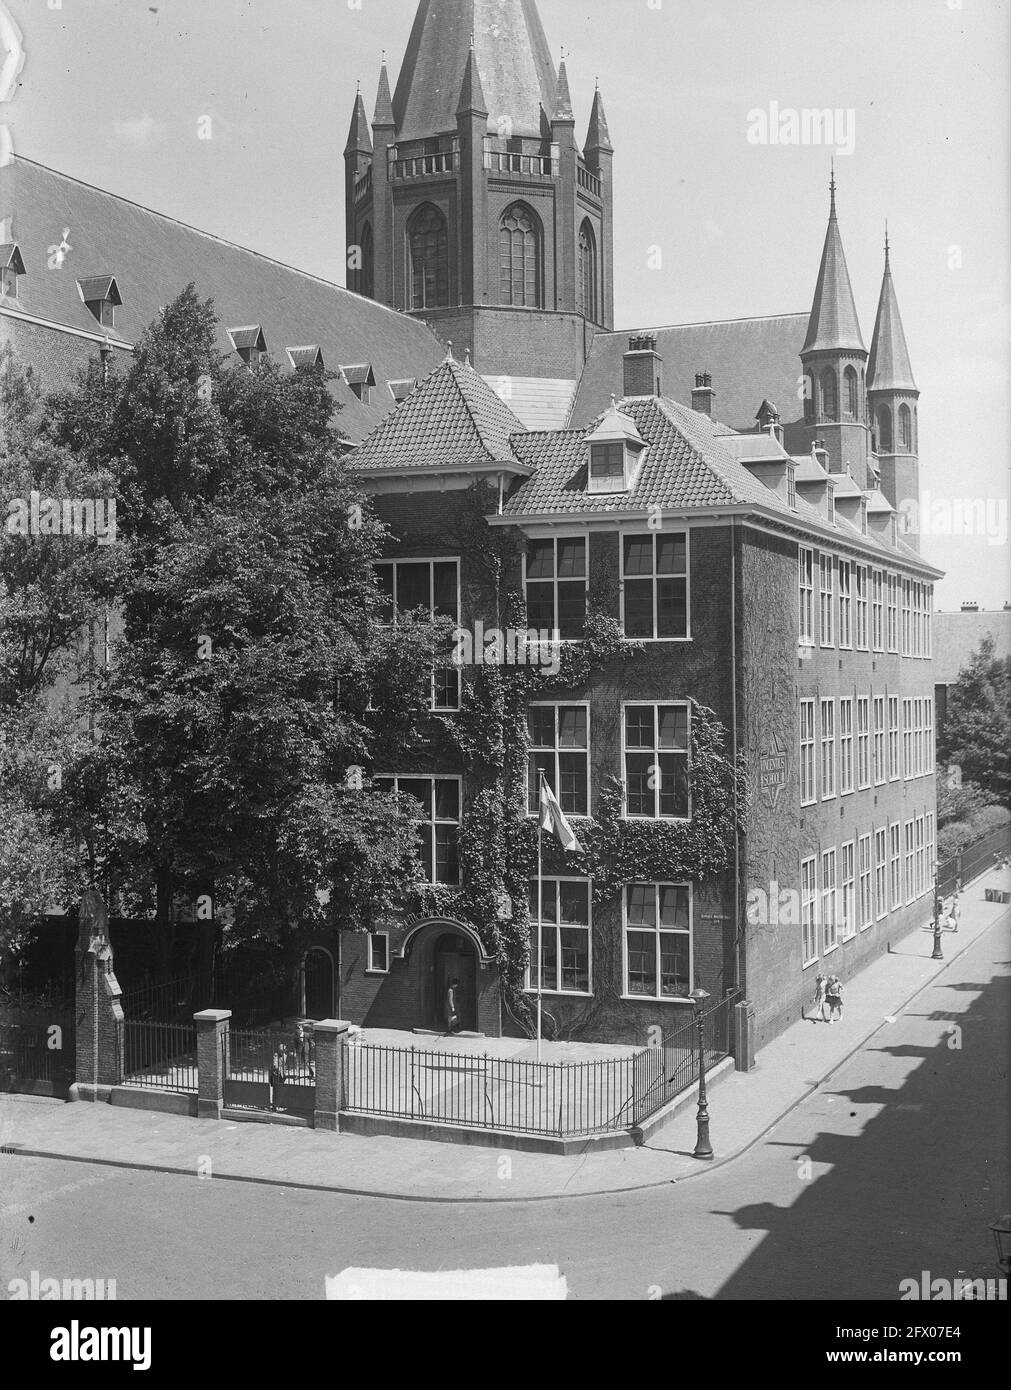 School building Saint Vincent (Lindeman), July 1, 1950, buildings, schools, The Netherlands, 20th century press agency photo, news to remember, documentary, historic photography 1945-1990, visual stories, human history of the Twentieth Century, capturing moments in time Stock Photo